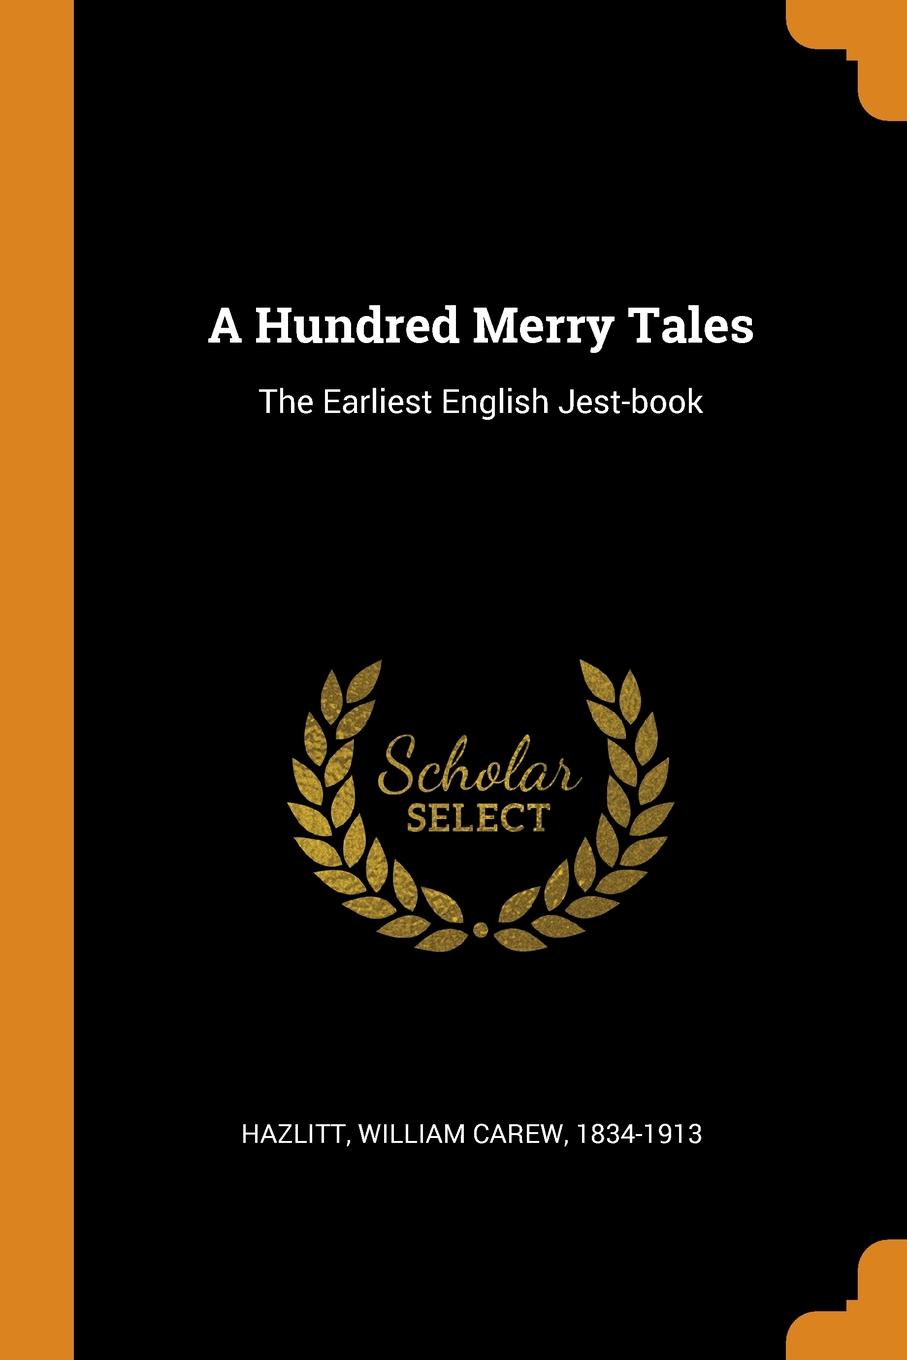 A Hundred Merry Tales. The Earliest English Jest-book